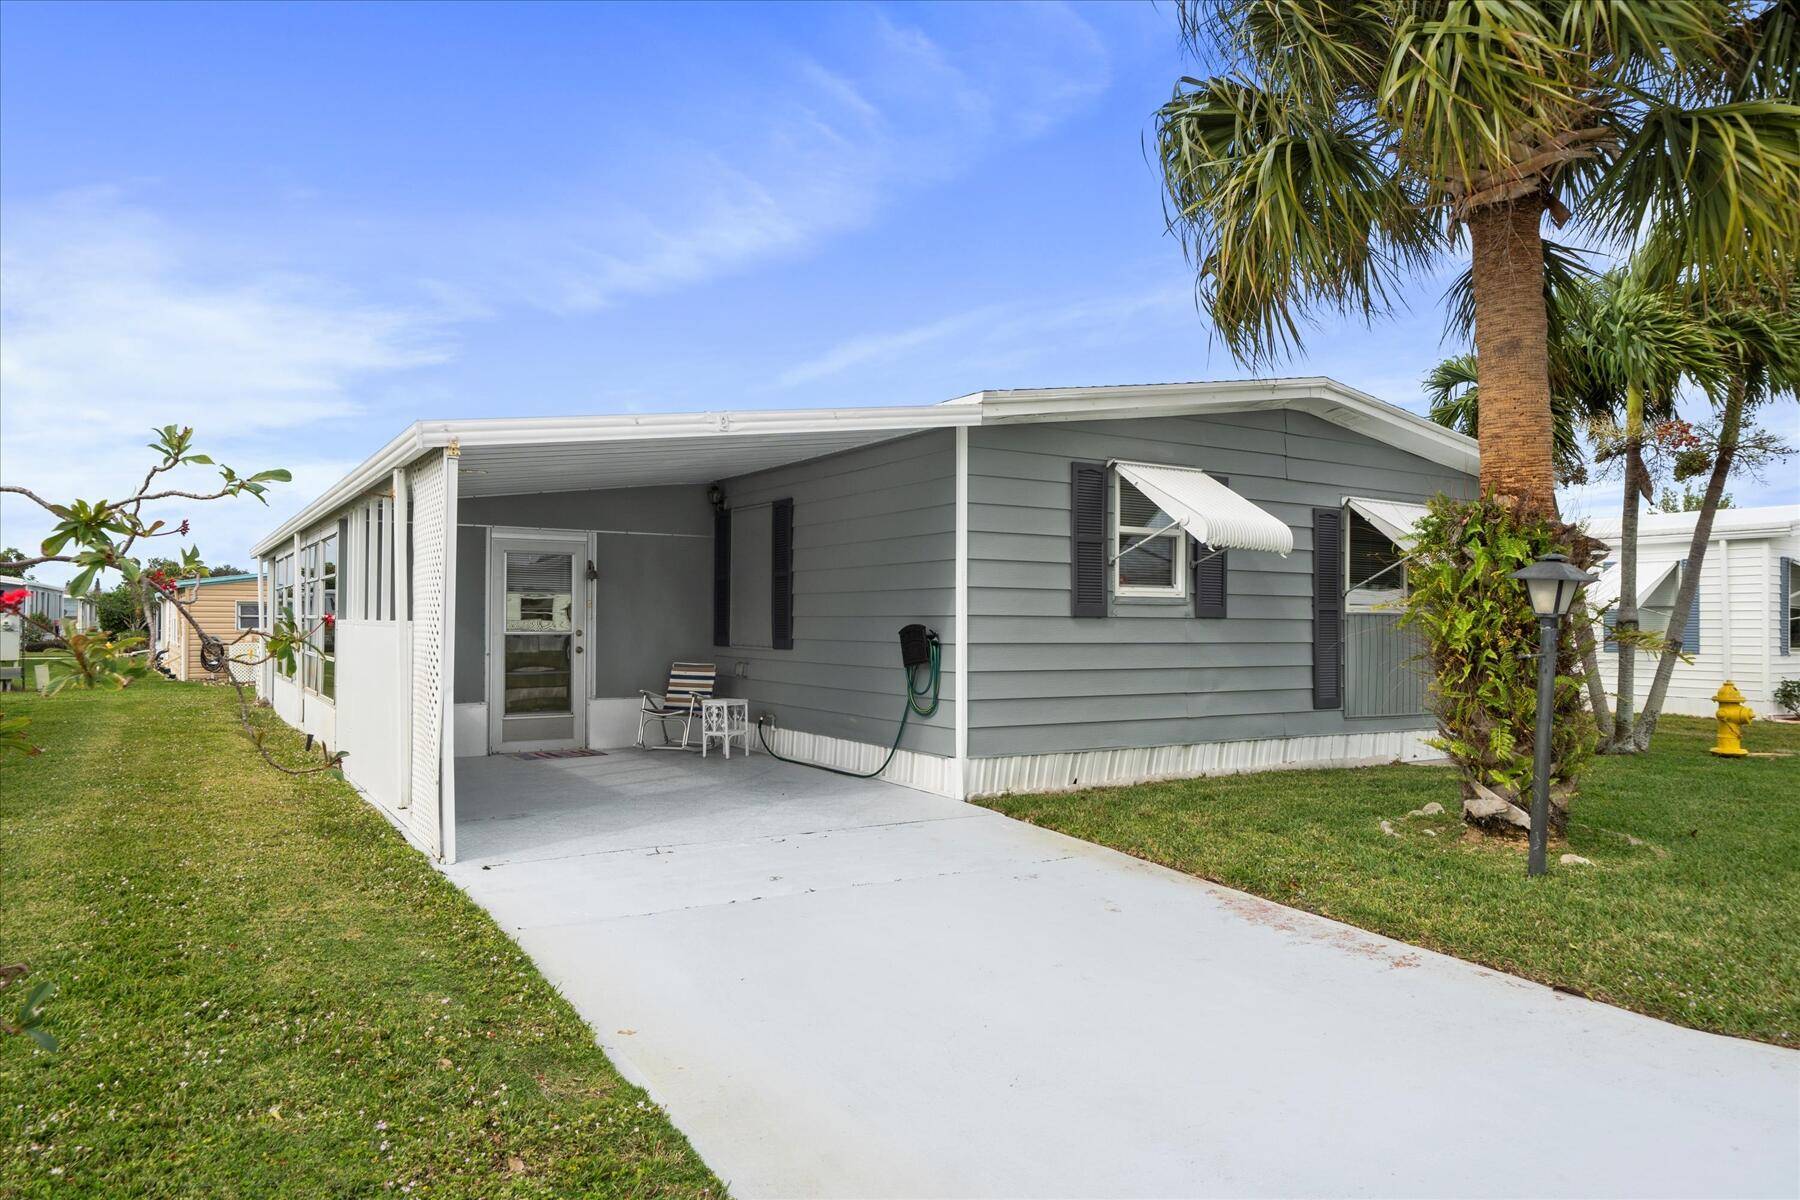 Come check out this spacious 2 2 mobile home located in the much desired 55 community of Pinelake Village in Jensen Beach.